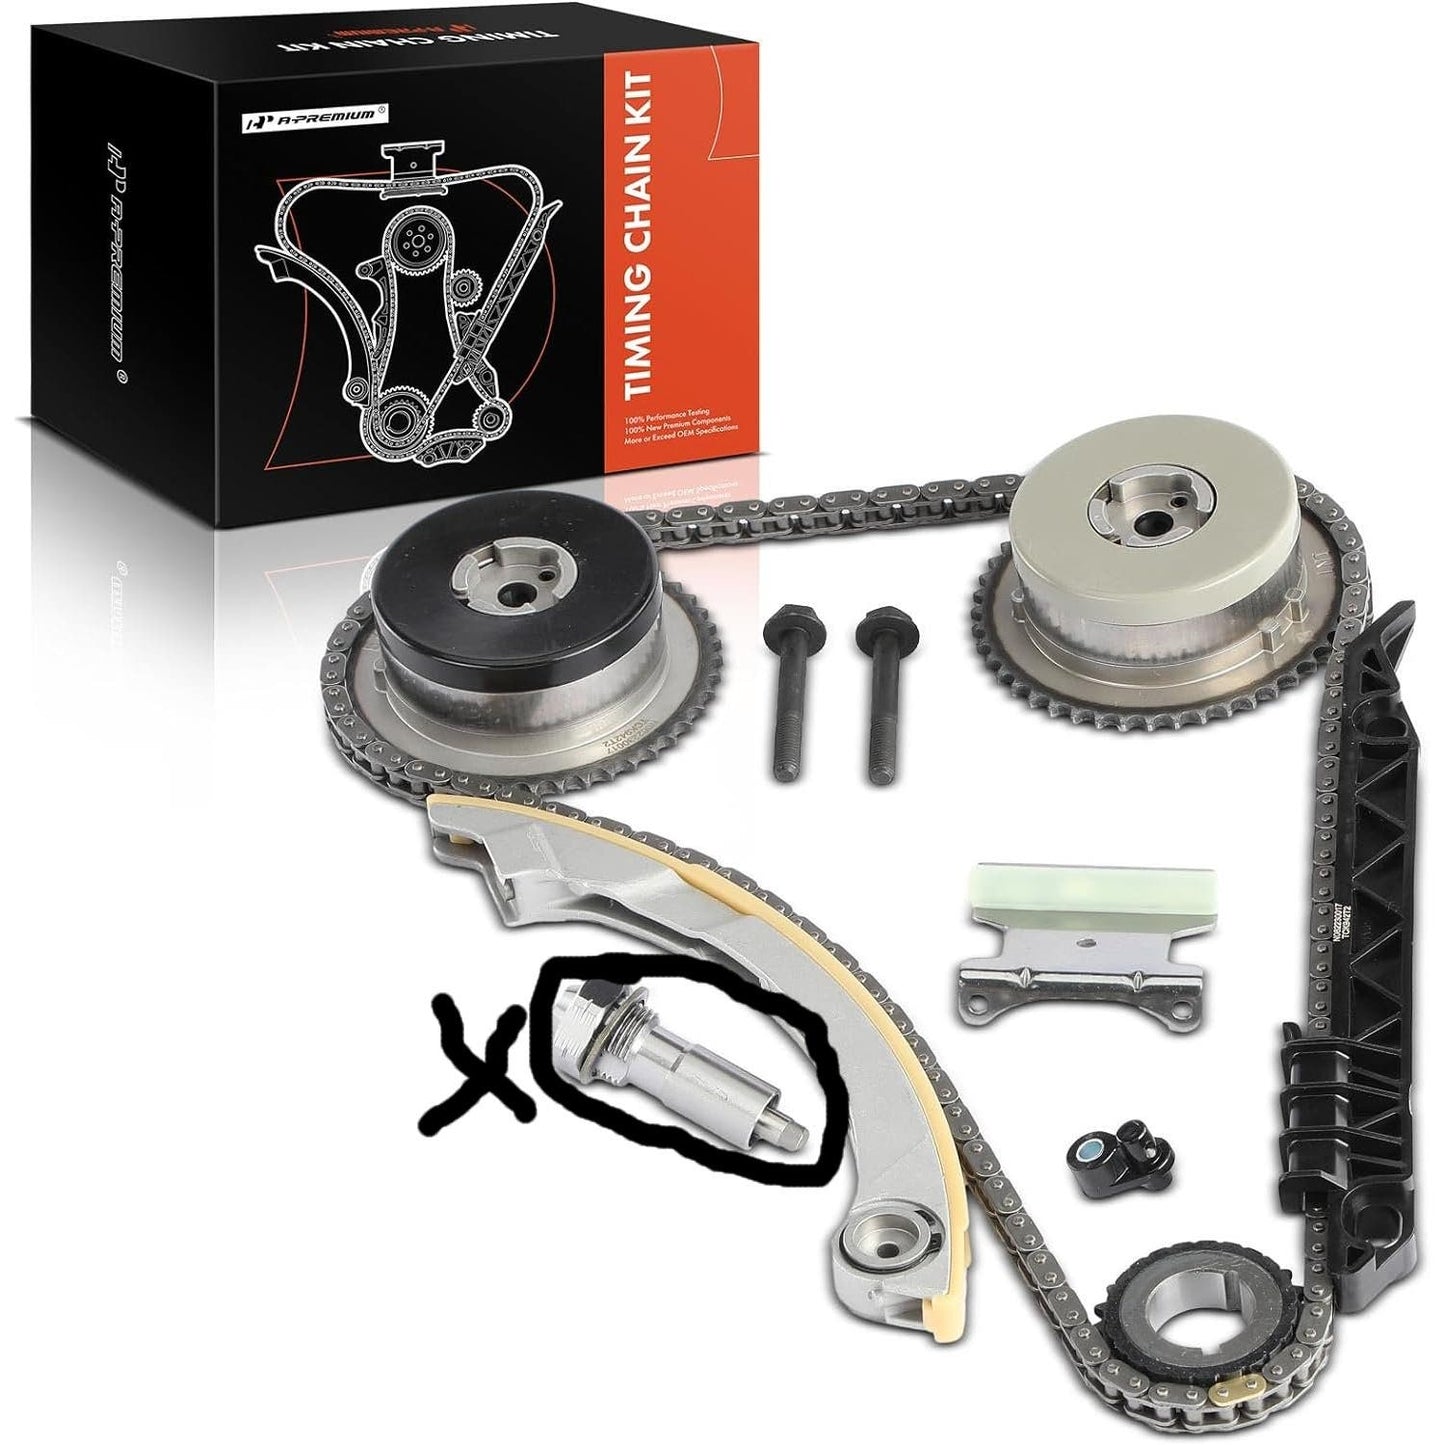 Timing Chain Kit W/Damper & Guide & VVT Sprocket Fits listed Vehicles in Descrip